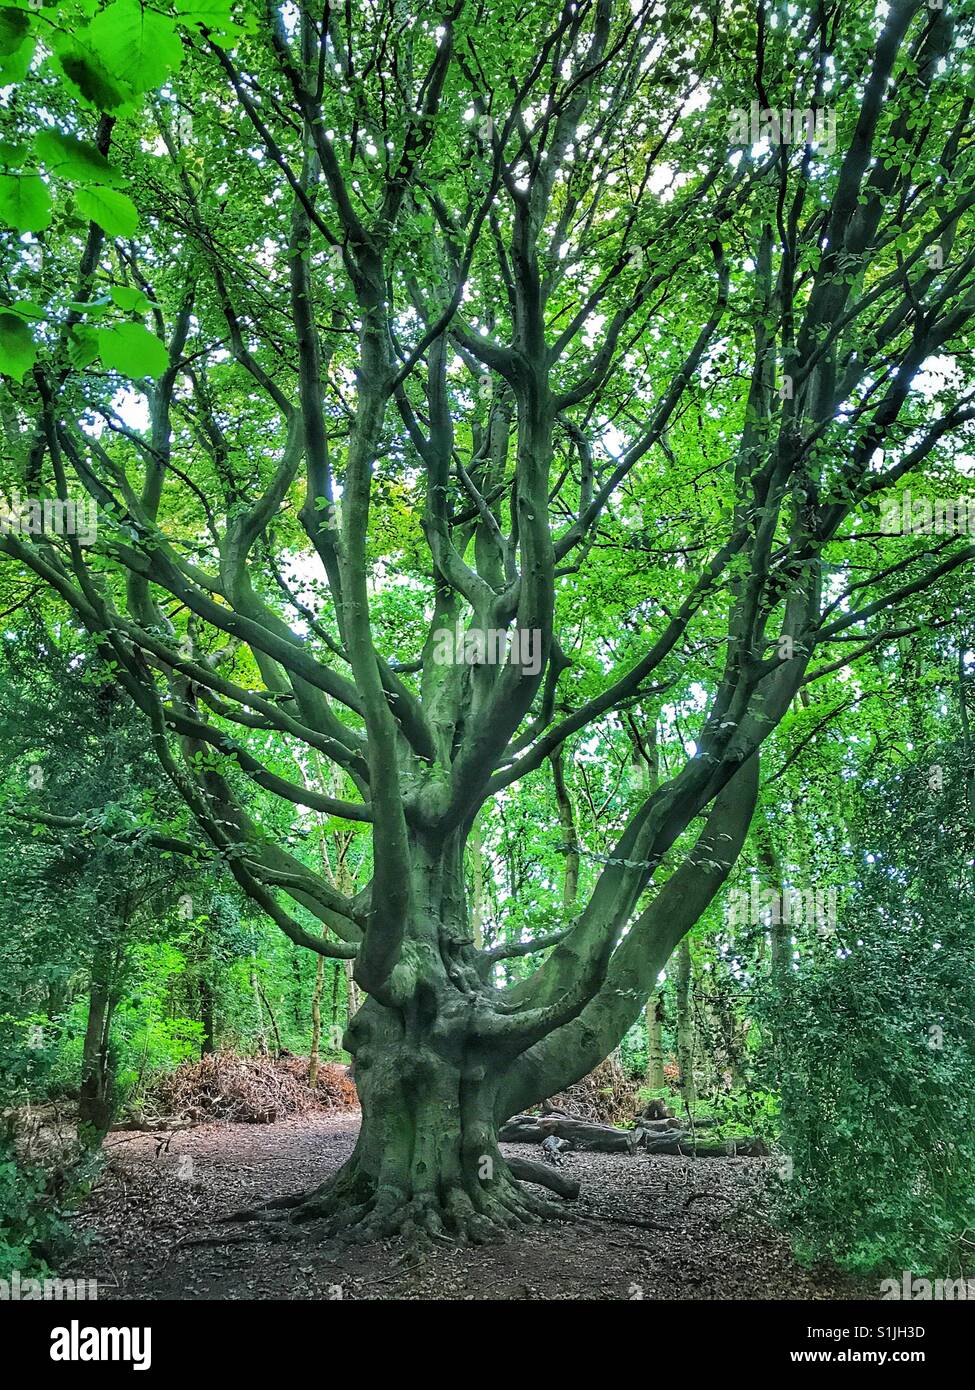 Large, mature beech tree in the middle of a forest Stock Photo